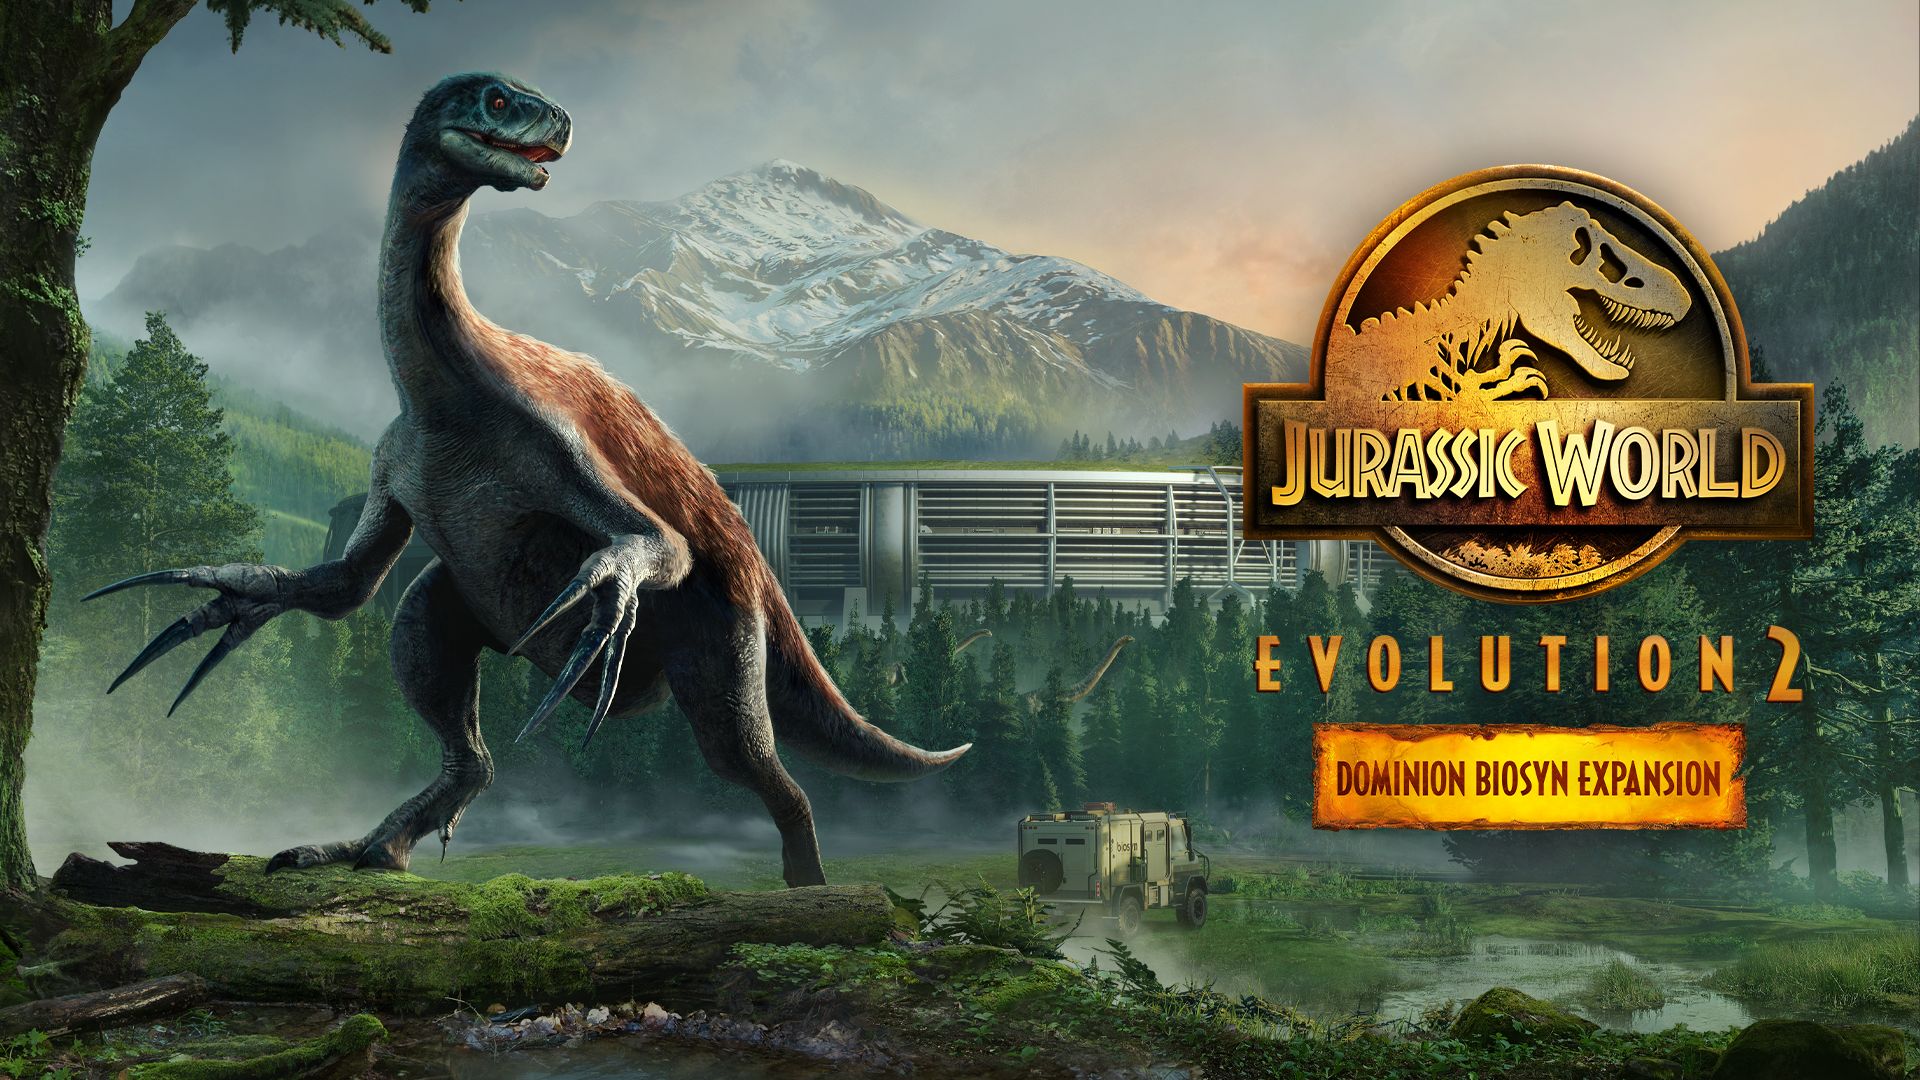 Video For Jurassic World Evolution 2: Dominion Biosyn Expansion Available Now